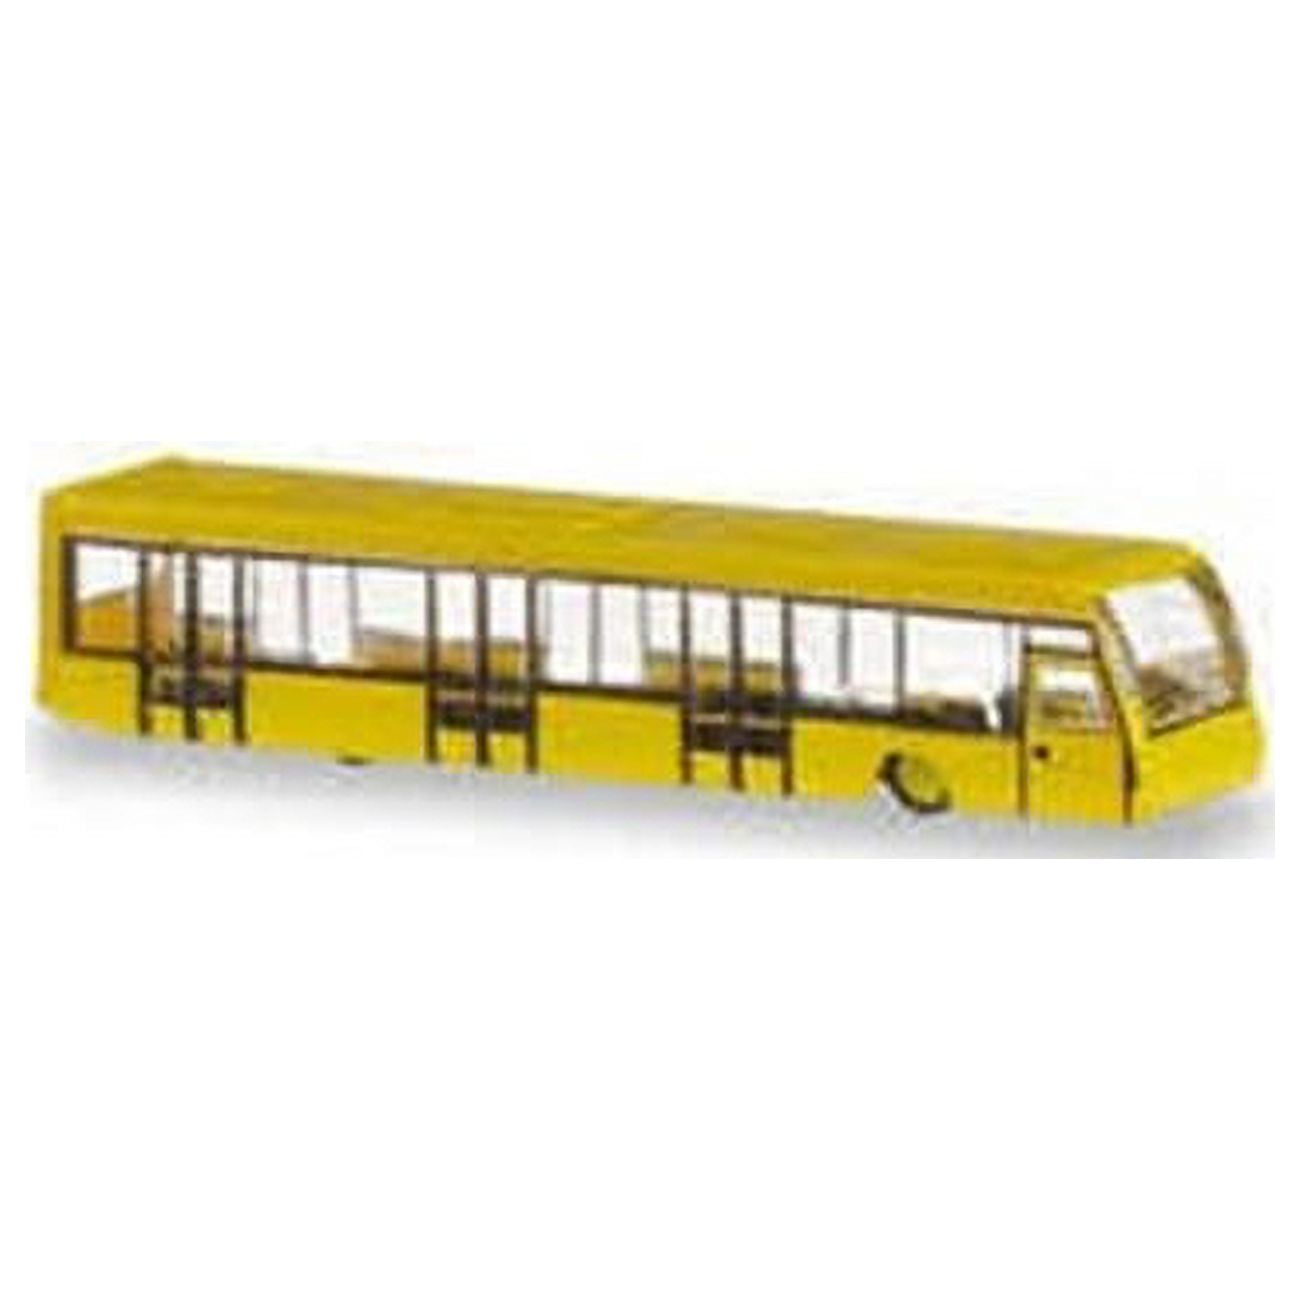 Airport Bus 1 By 400, Set Of 4